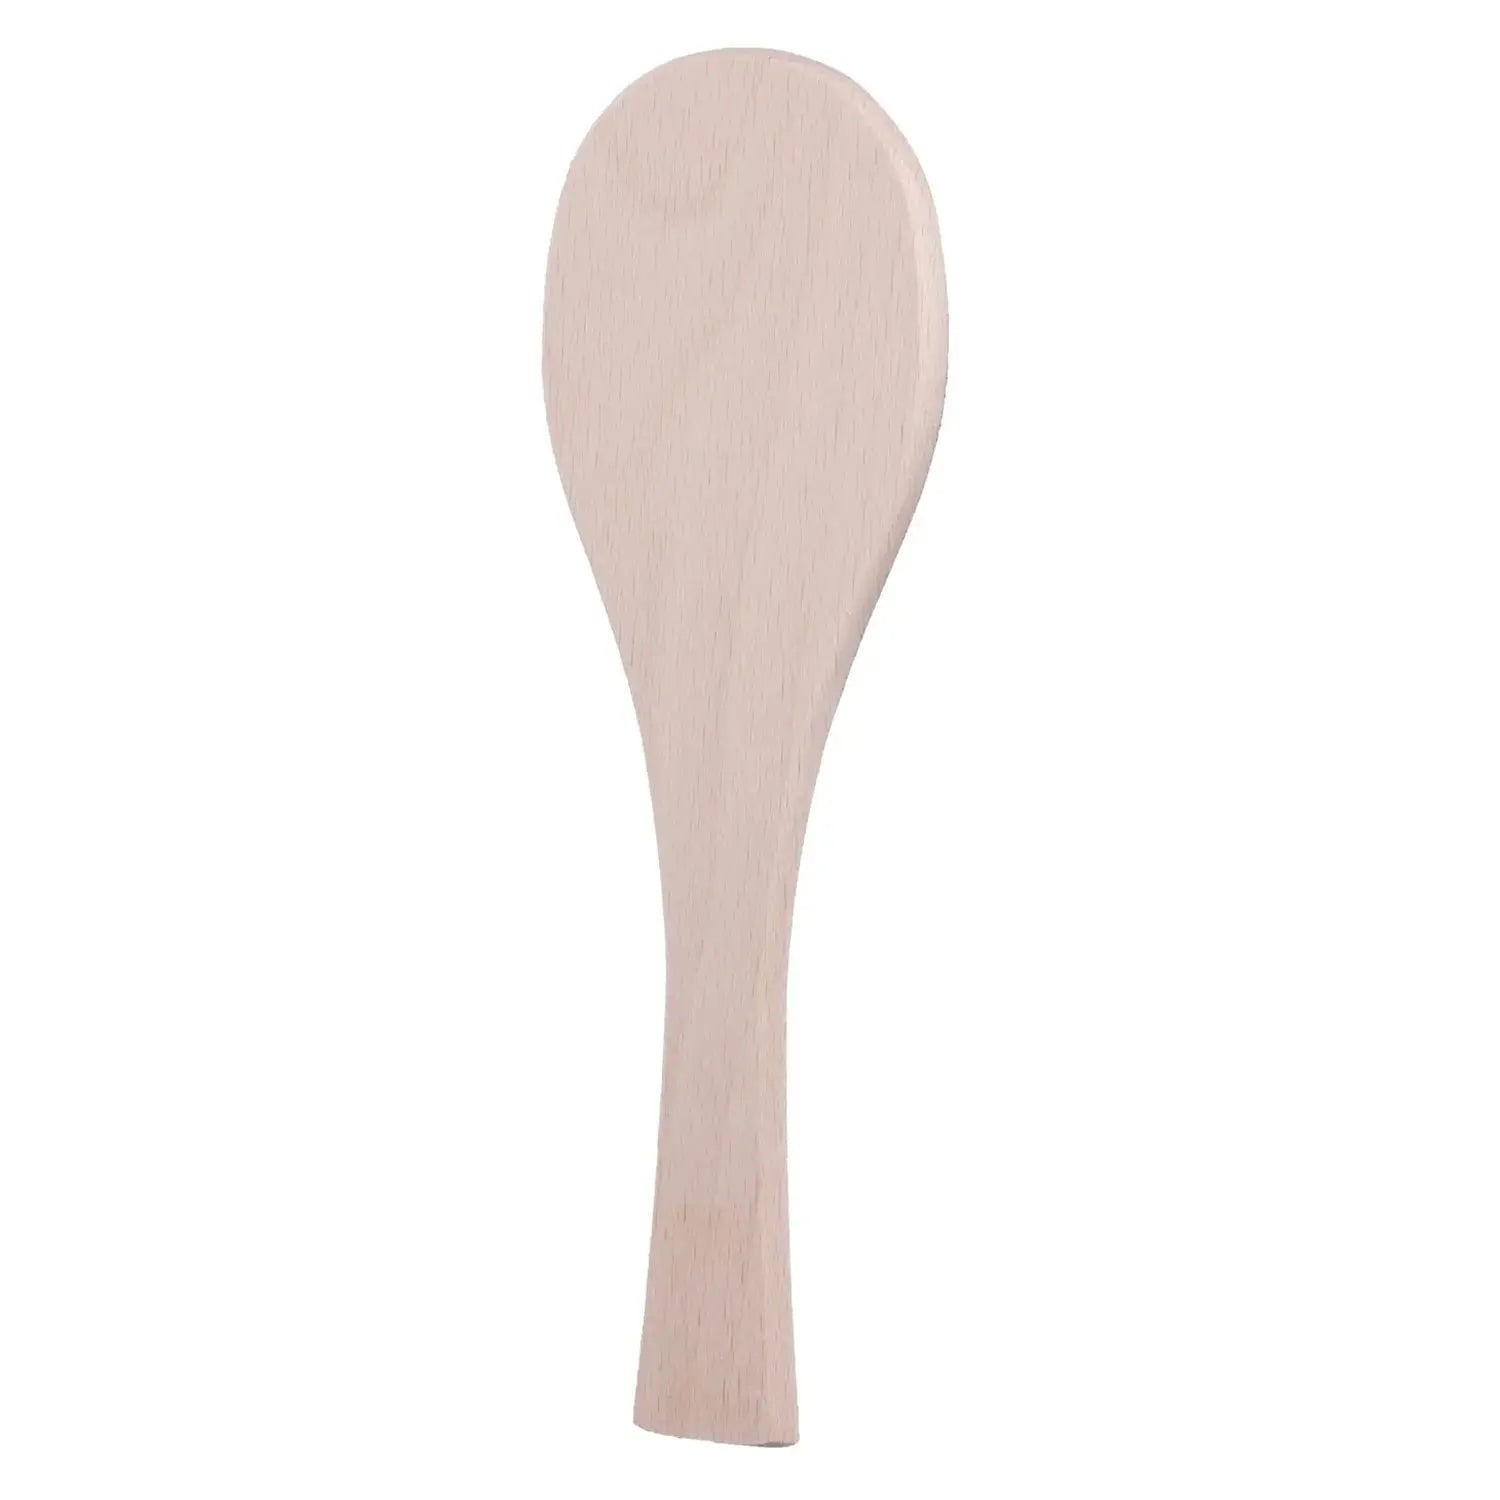 TIGERCROWN All-Silicone Spatula 26.4cm - Globalkitchen Japan